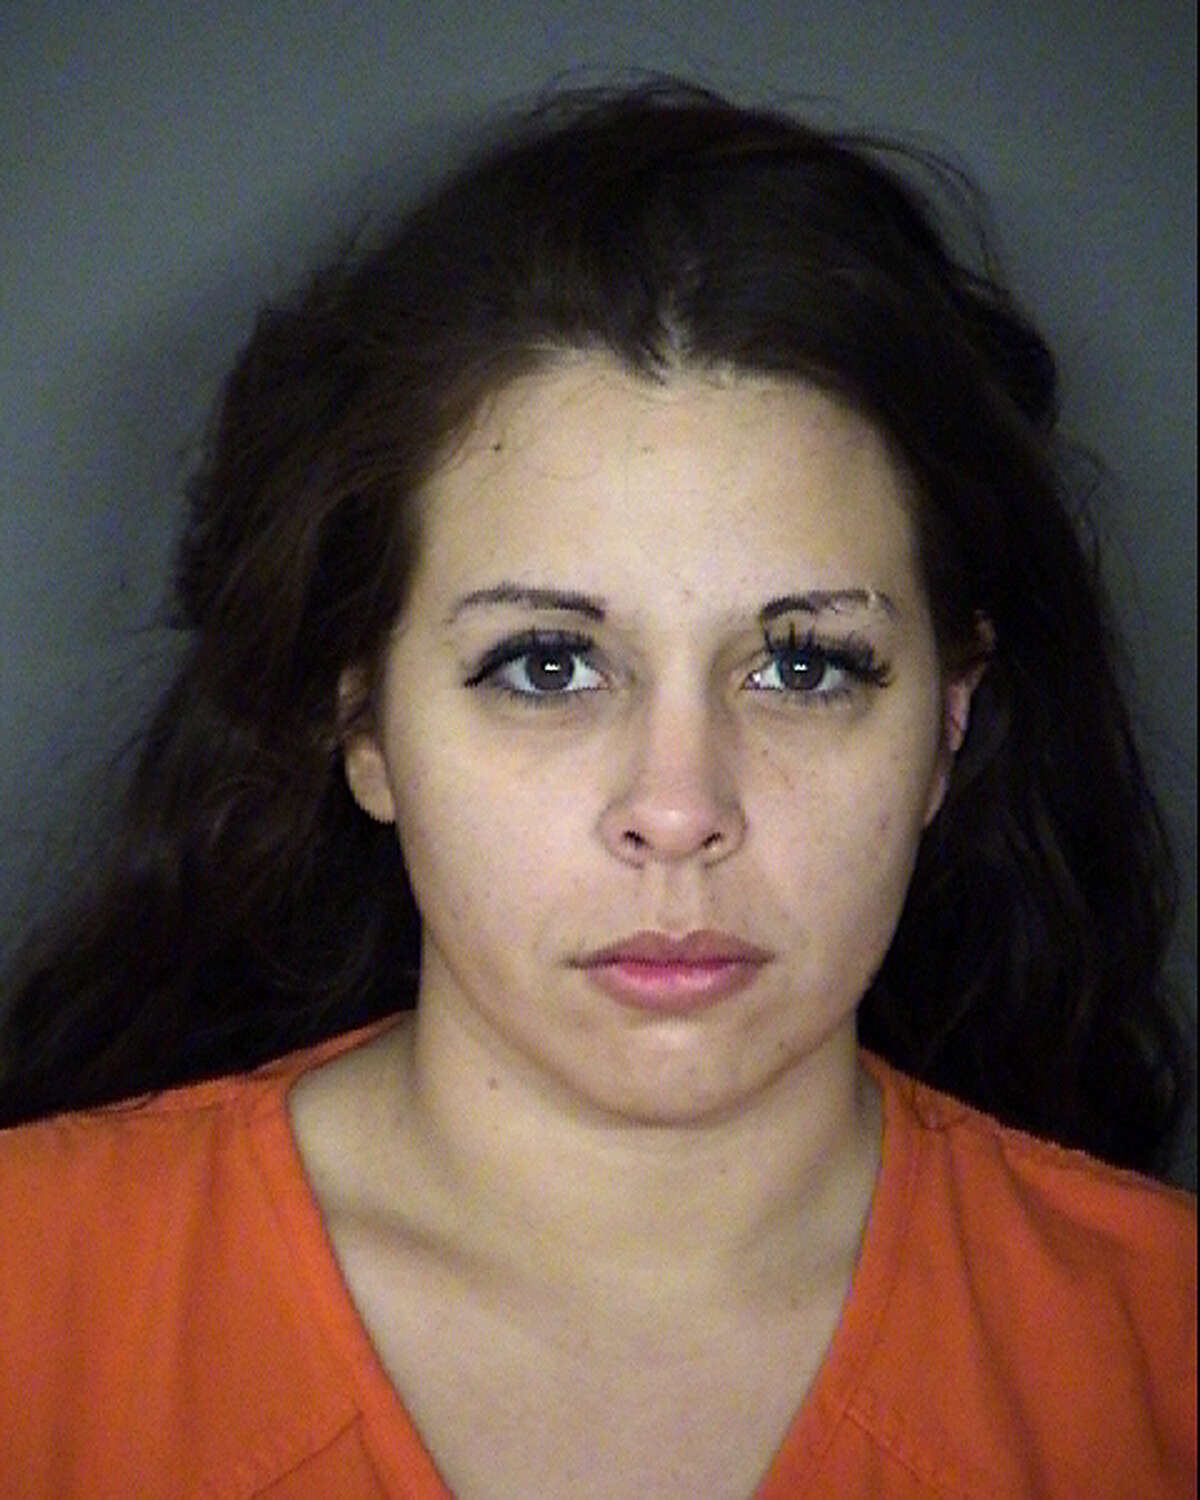 Meagan Ashley Cantu, 30, was charged with capital murder in the death of 23-year-old Martin Gonzales.